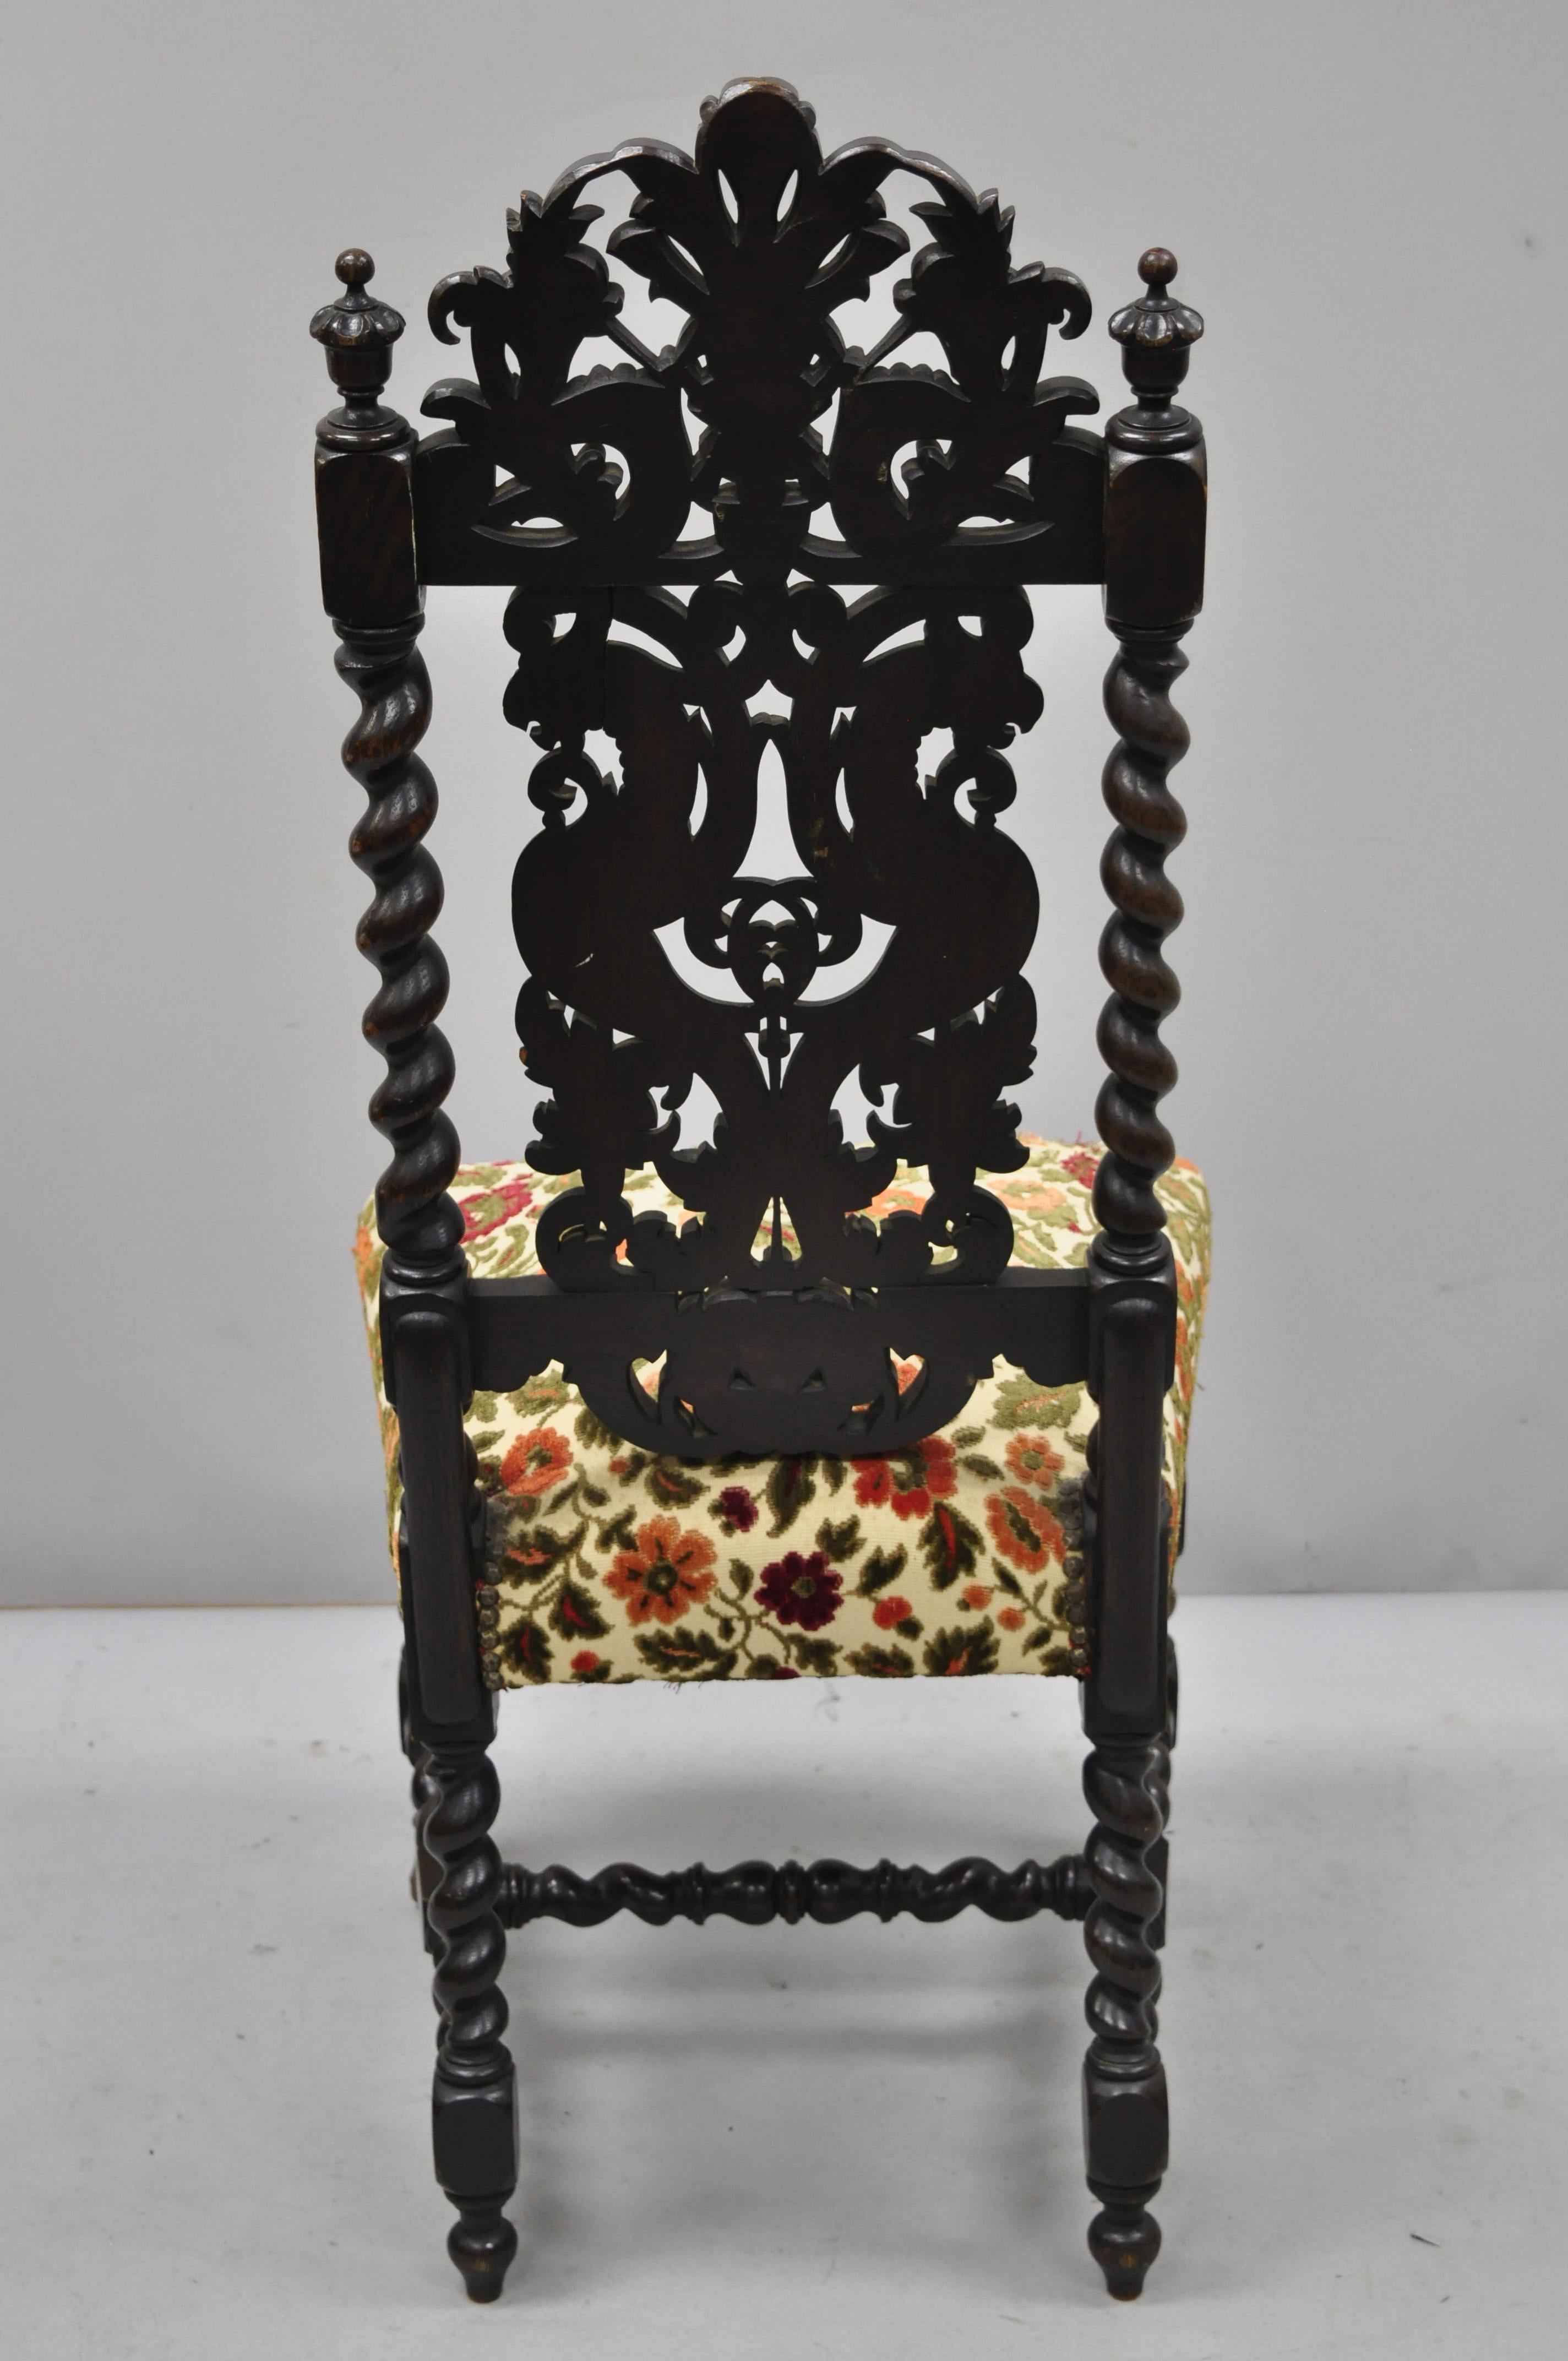 Italian 19th Century Carved Walnut Figural Renaissance Revival Throne Side Chair For Sale